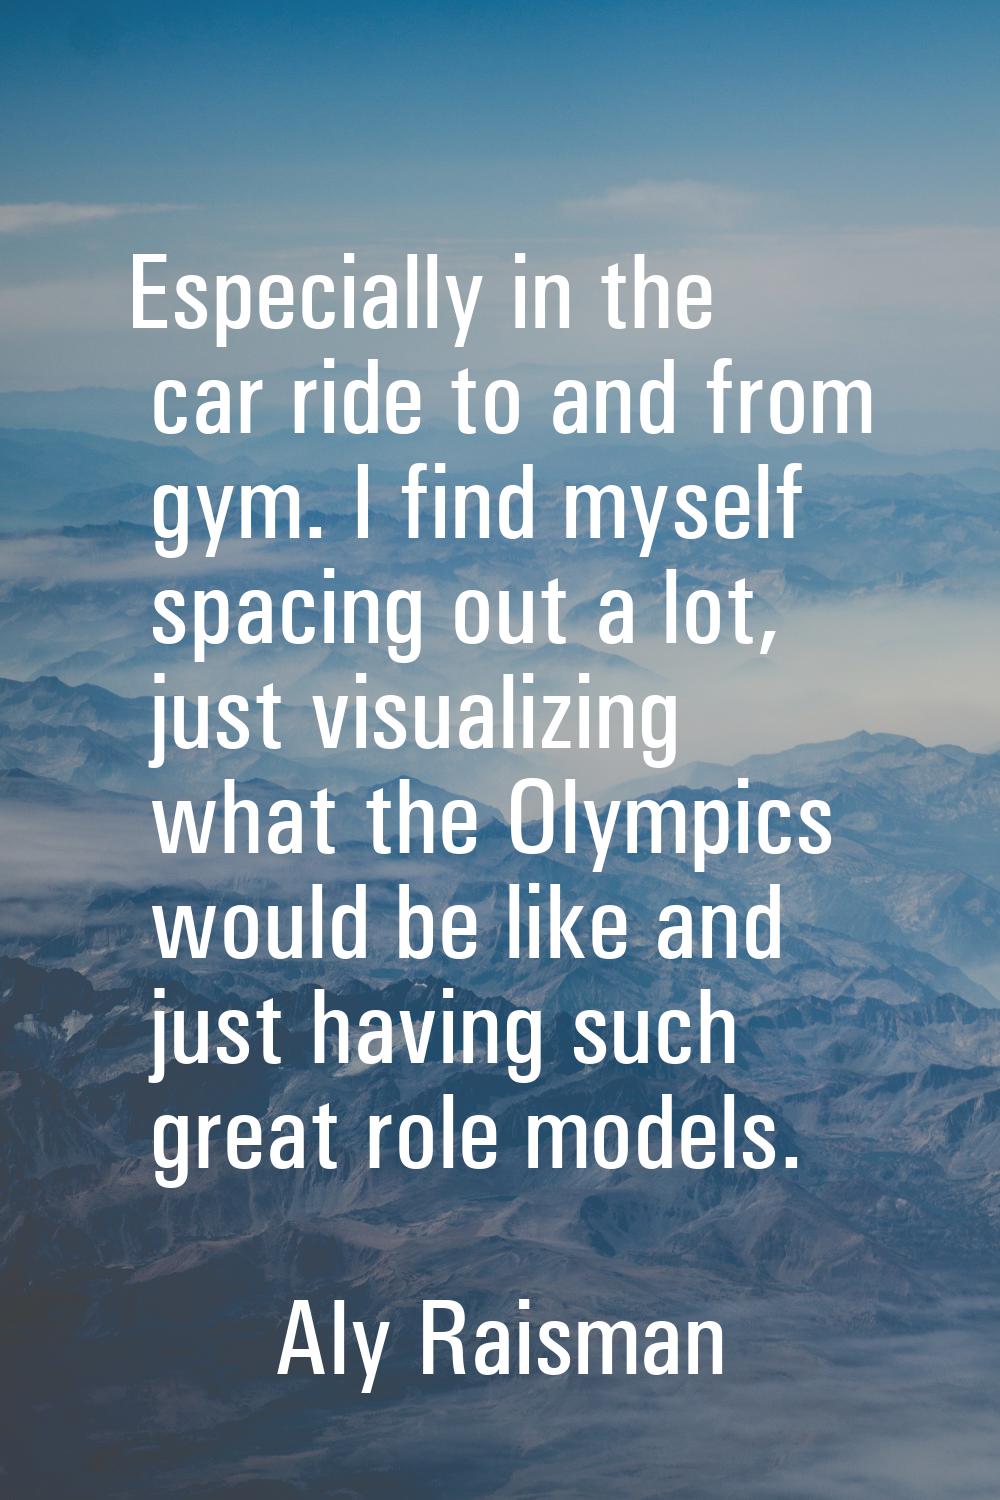 Especially in the car ride to and from gym. I find myself spacing out a lot, just visualizing what 